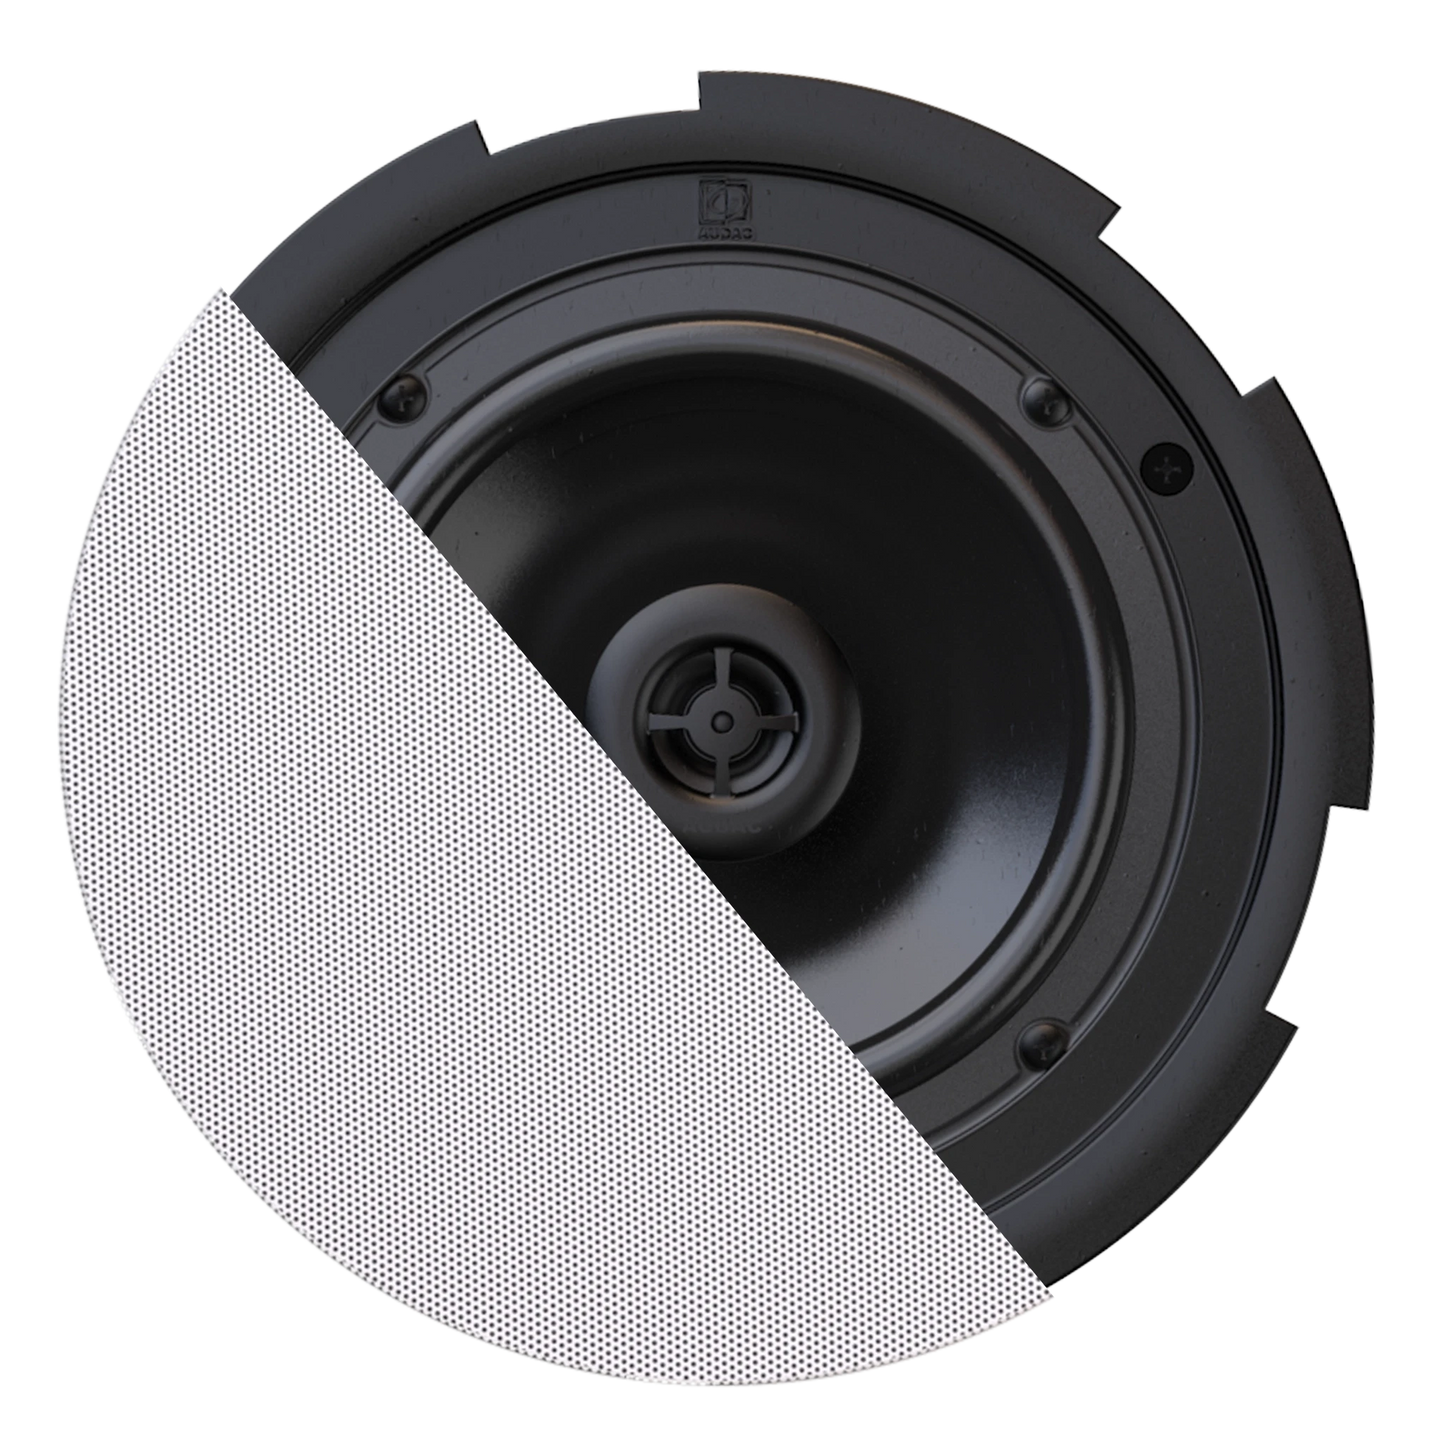 CIRA724 2-way 6.5" ceiling speaker with QuickFit™ and TwistFix™ grill